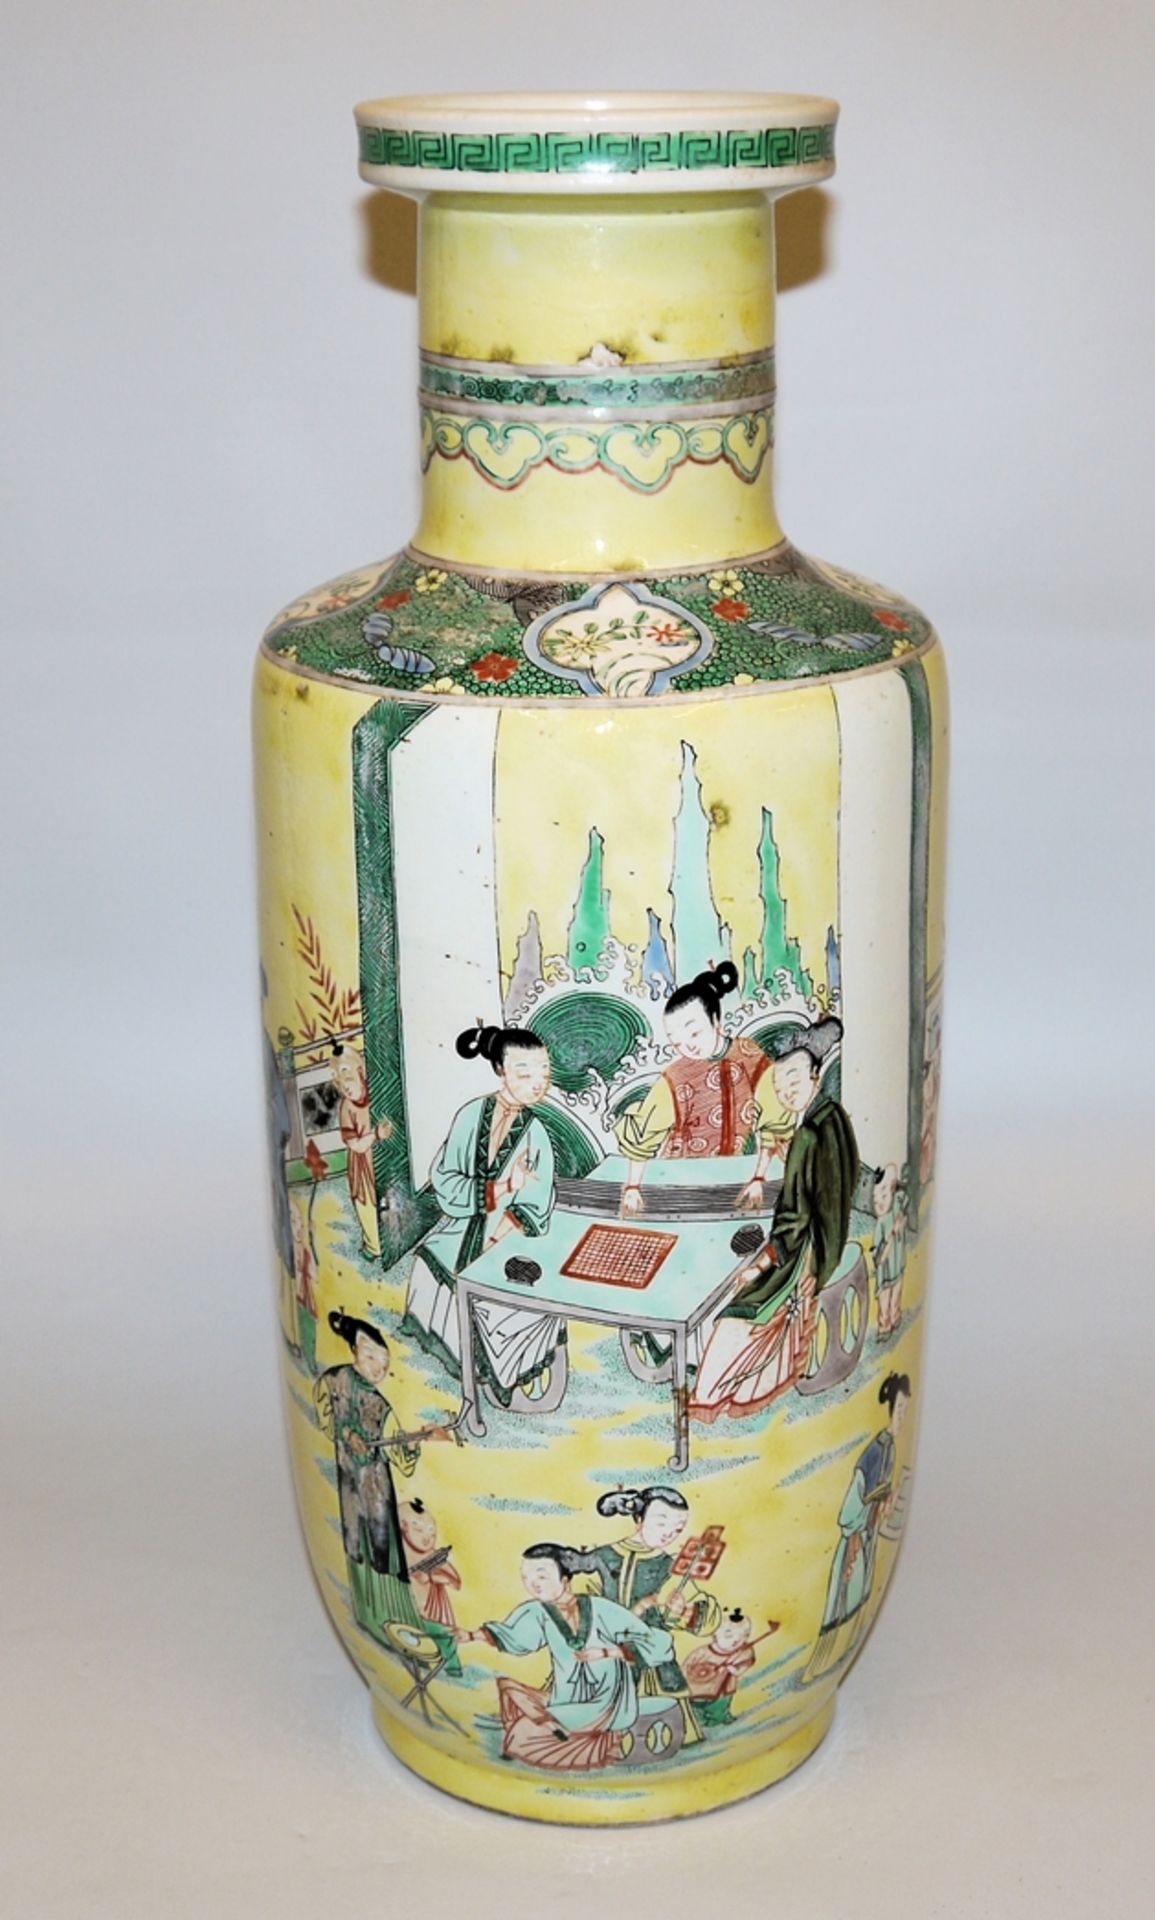 Large rouleau vase with family scenes in famille jaune, late Qing period, China c. 1900